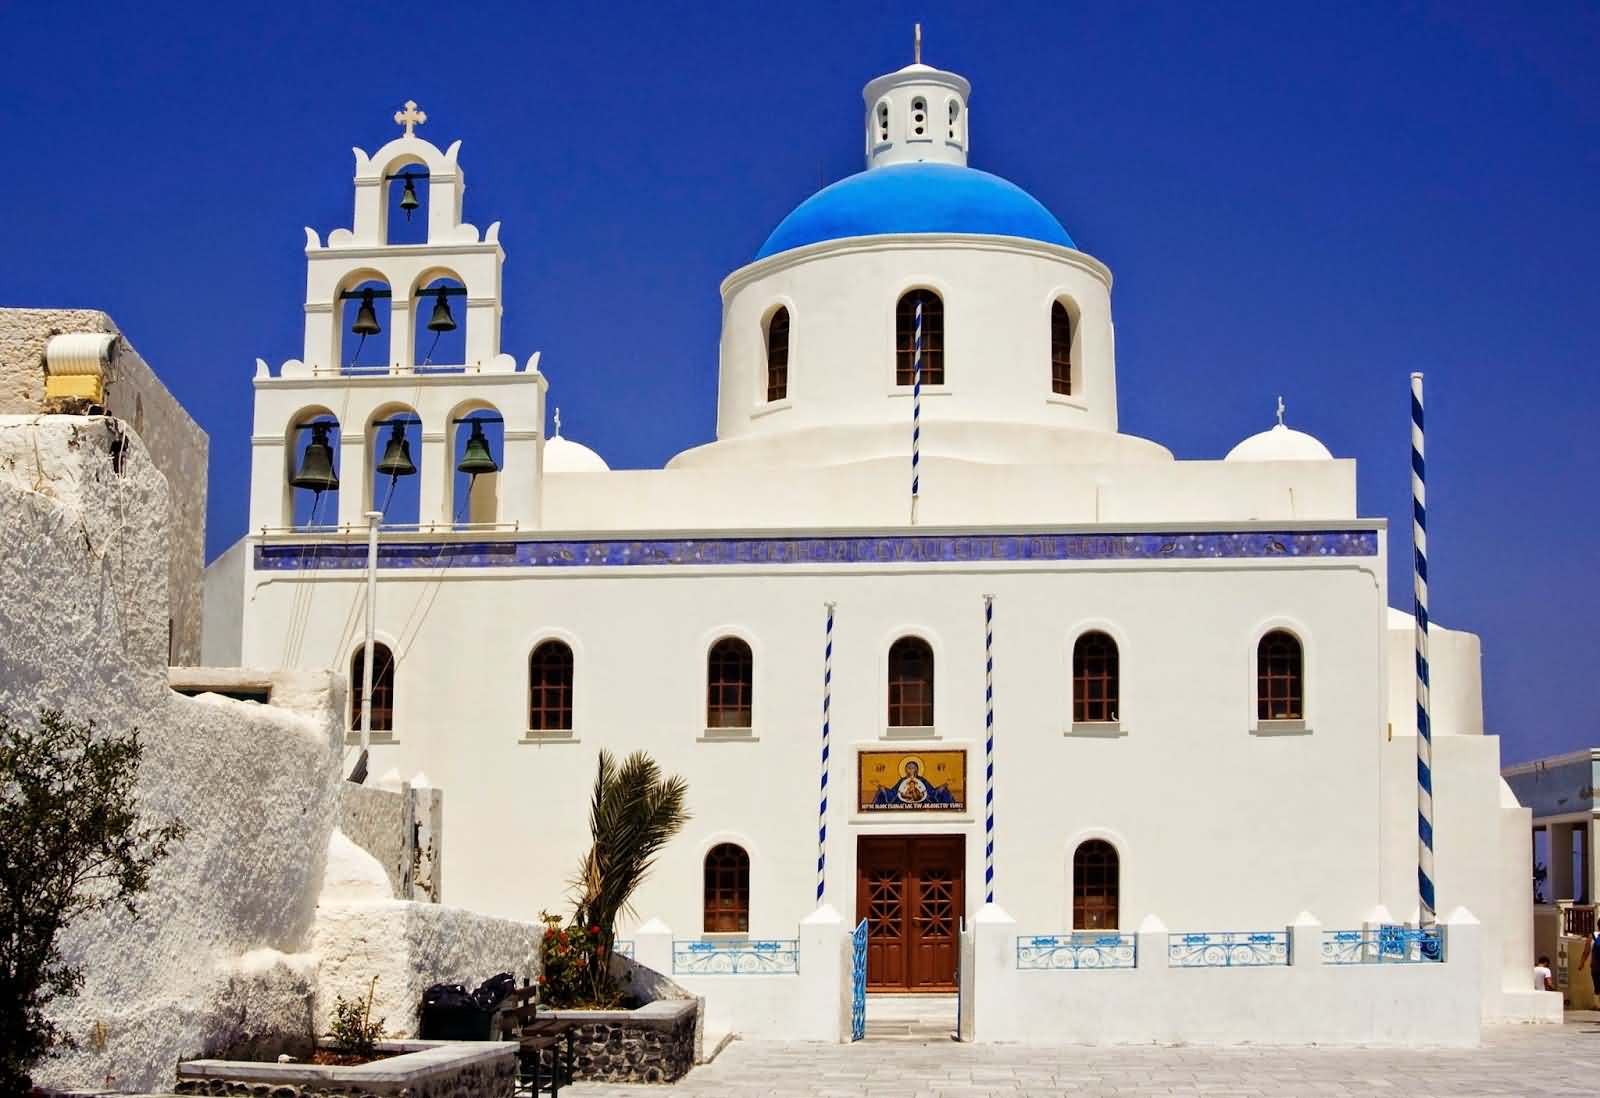 Front View Of The Blue Dome Church In Santorini